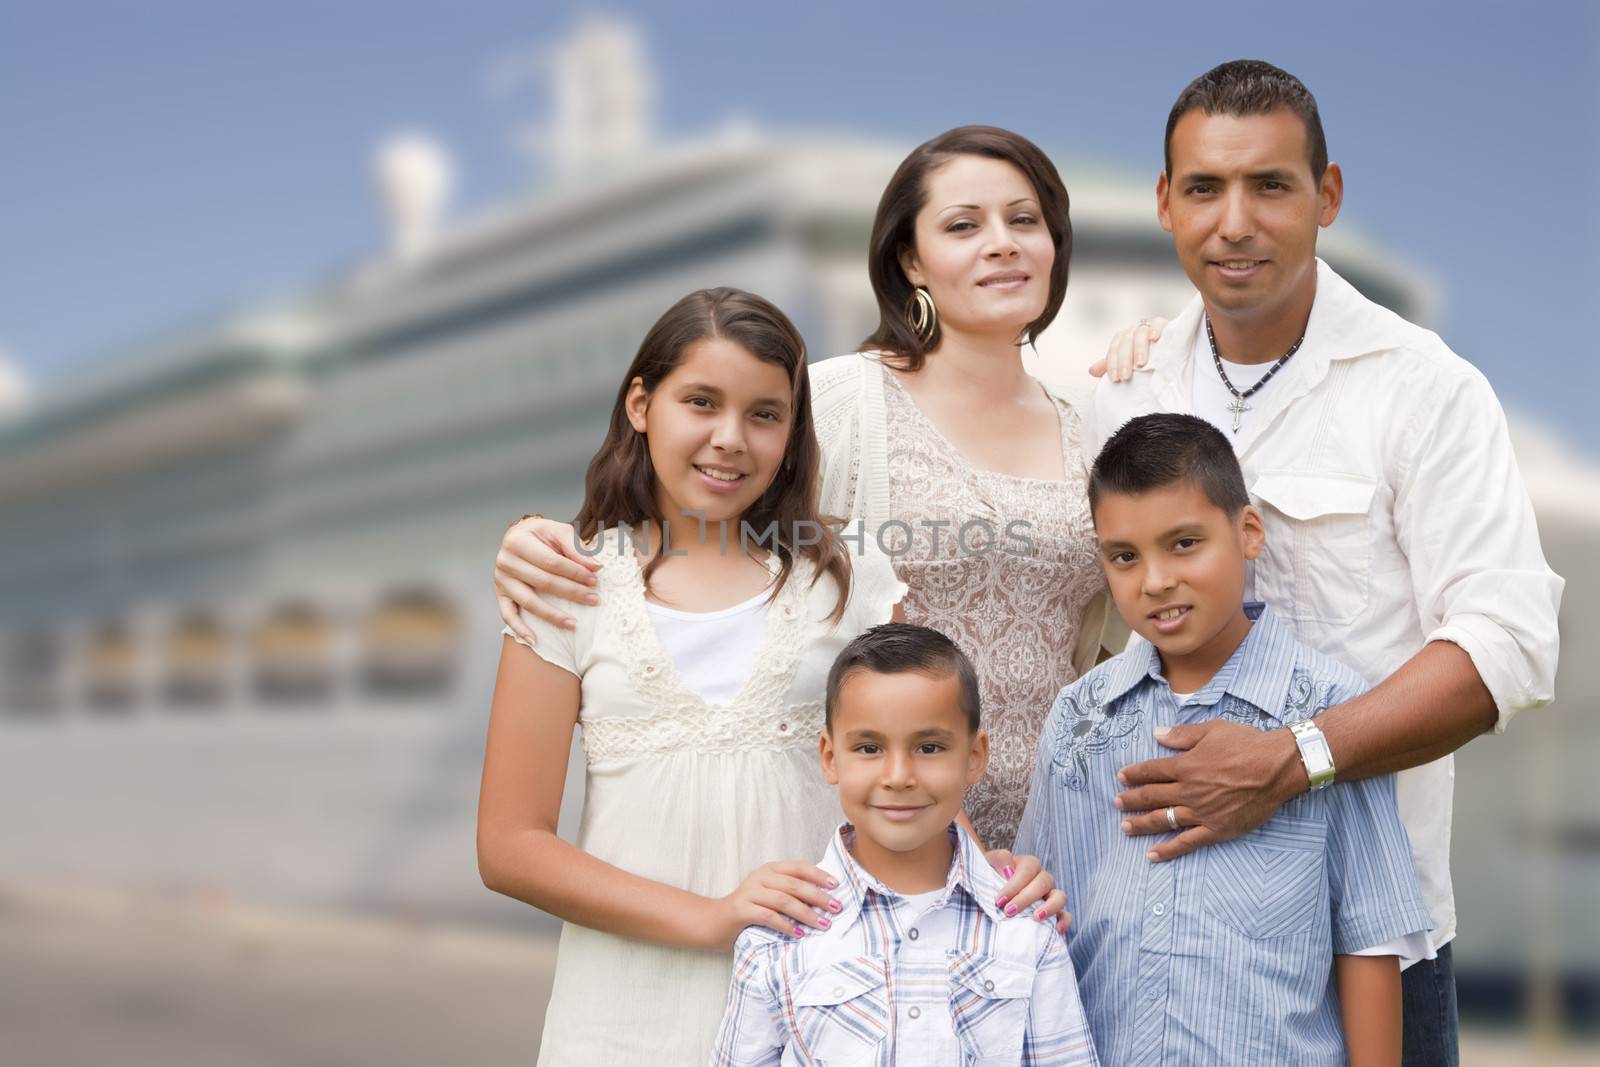 Young Happy Hispanic Family On The Dock In Front of a Cruise Ship.